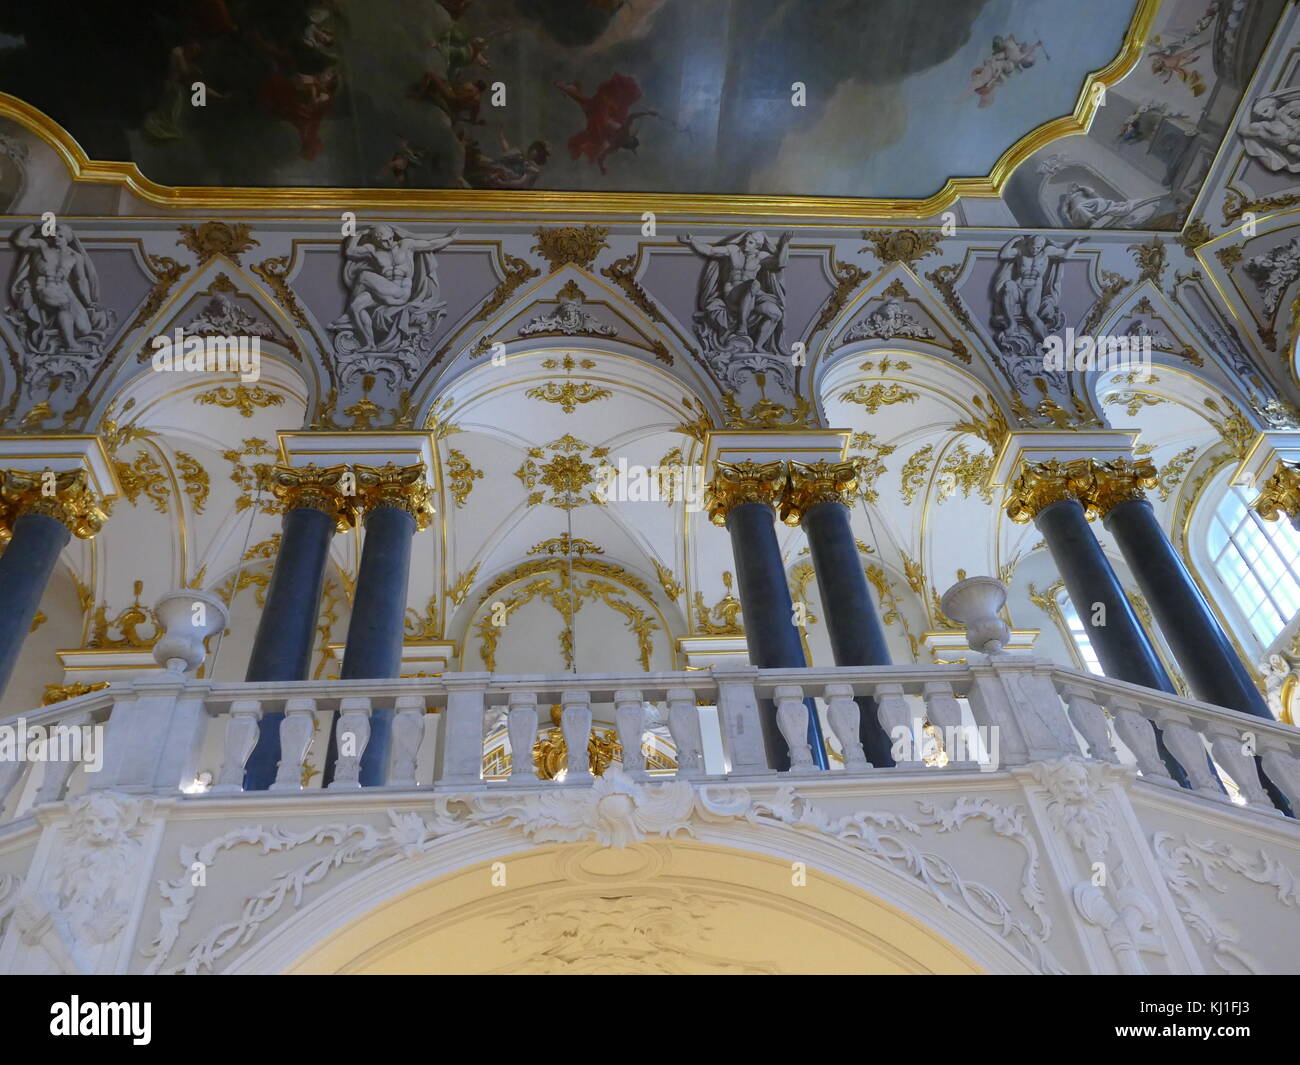 Ornamentation and gilded surfaces around the grand staircase of the Winter Palace, St Petersburg, Russia, which was, from 1732 to 1917, the official residence of the Russian monarchs. Stock Photo